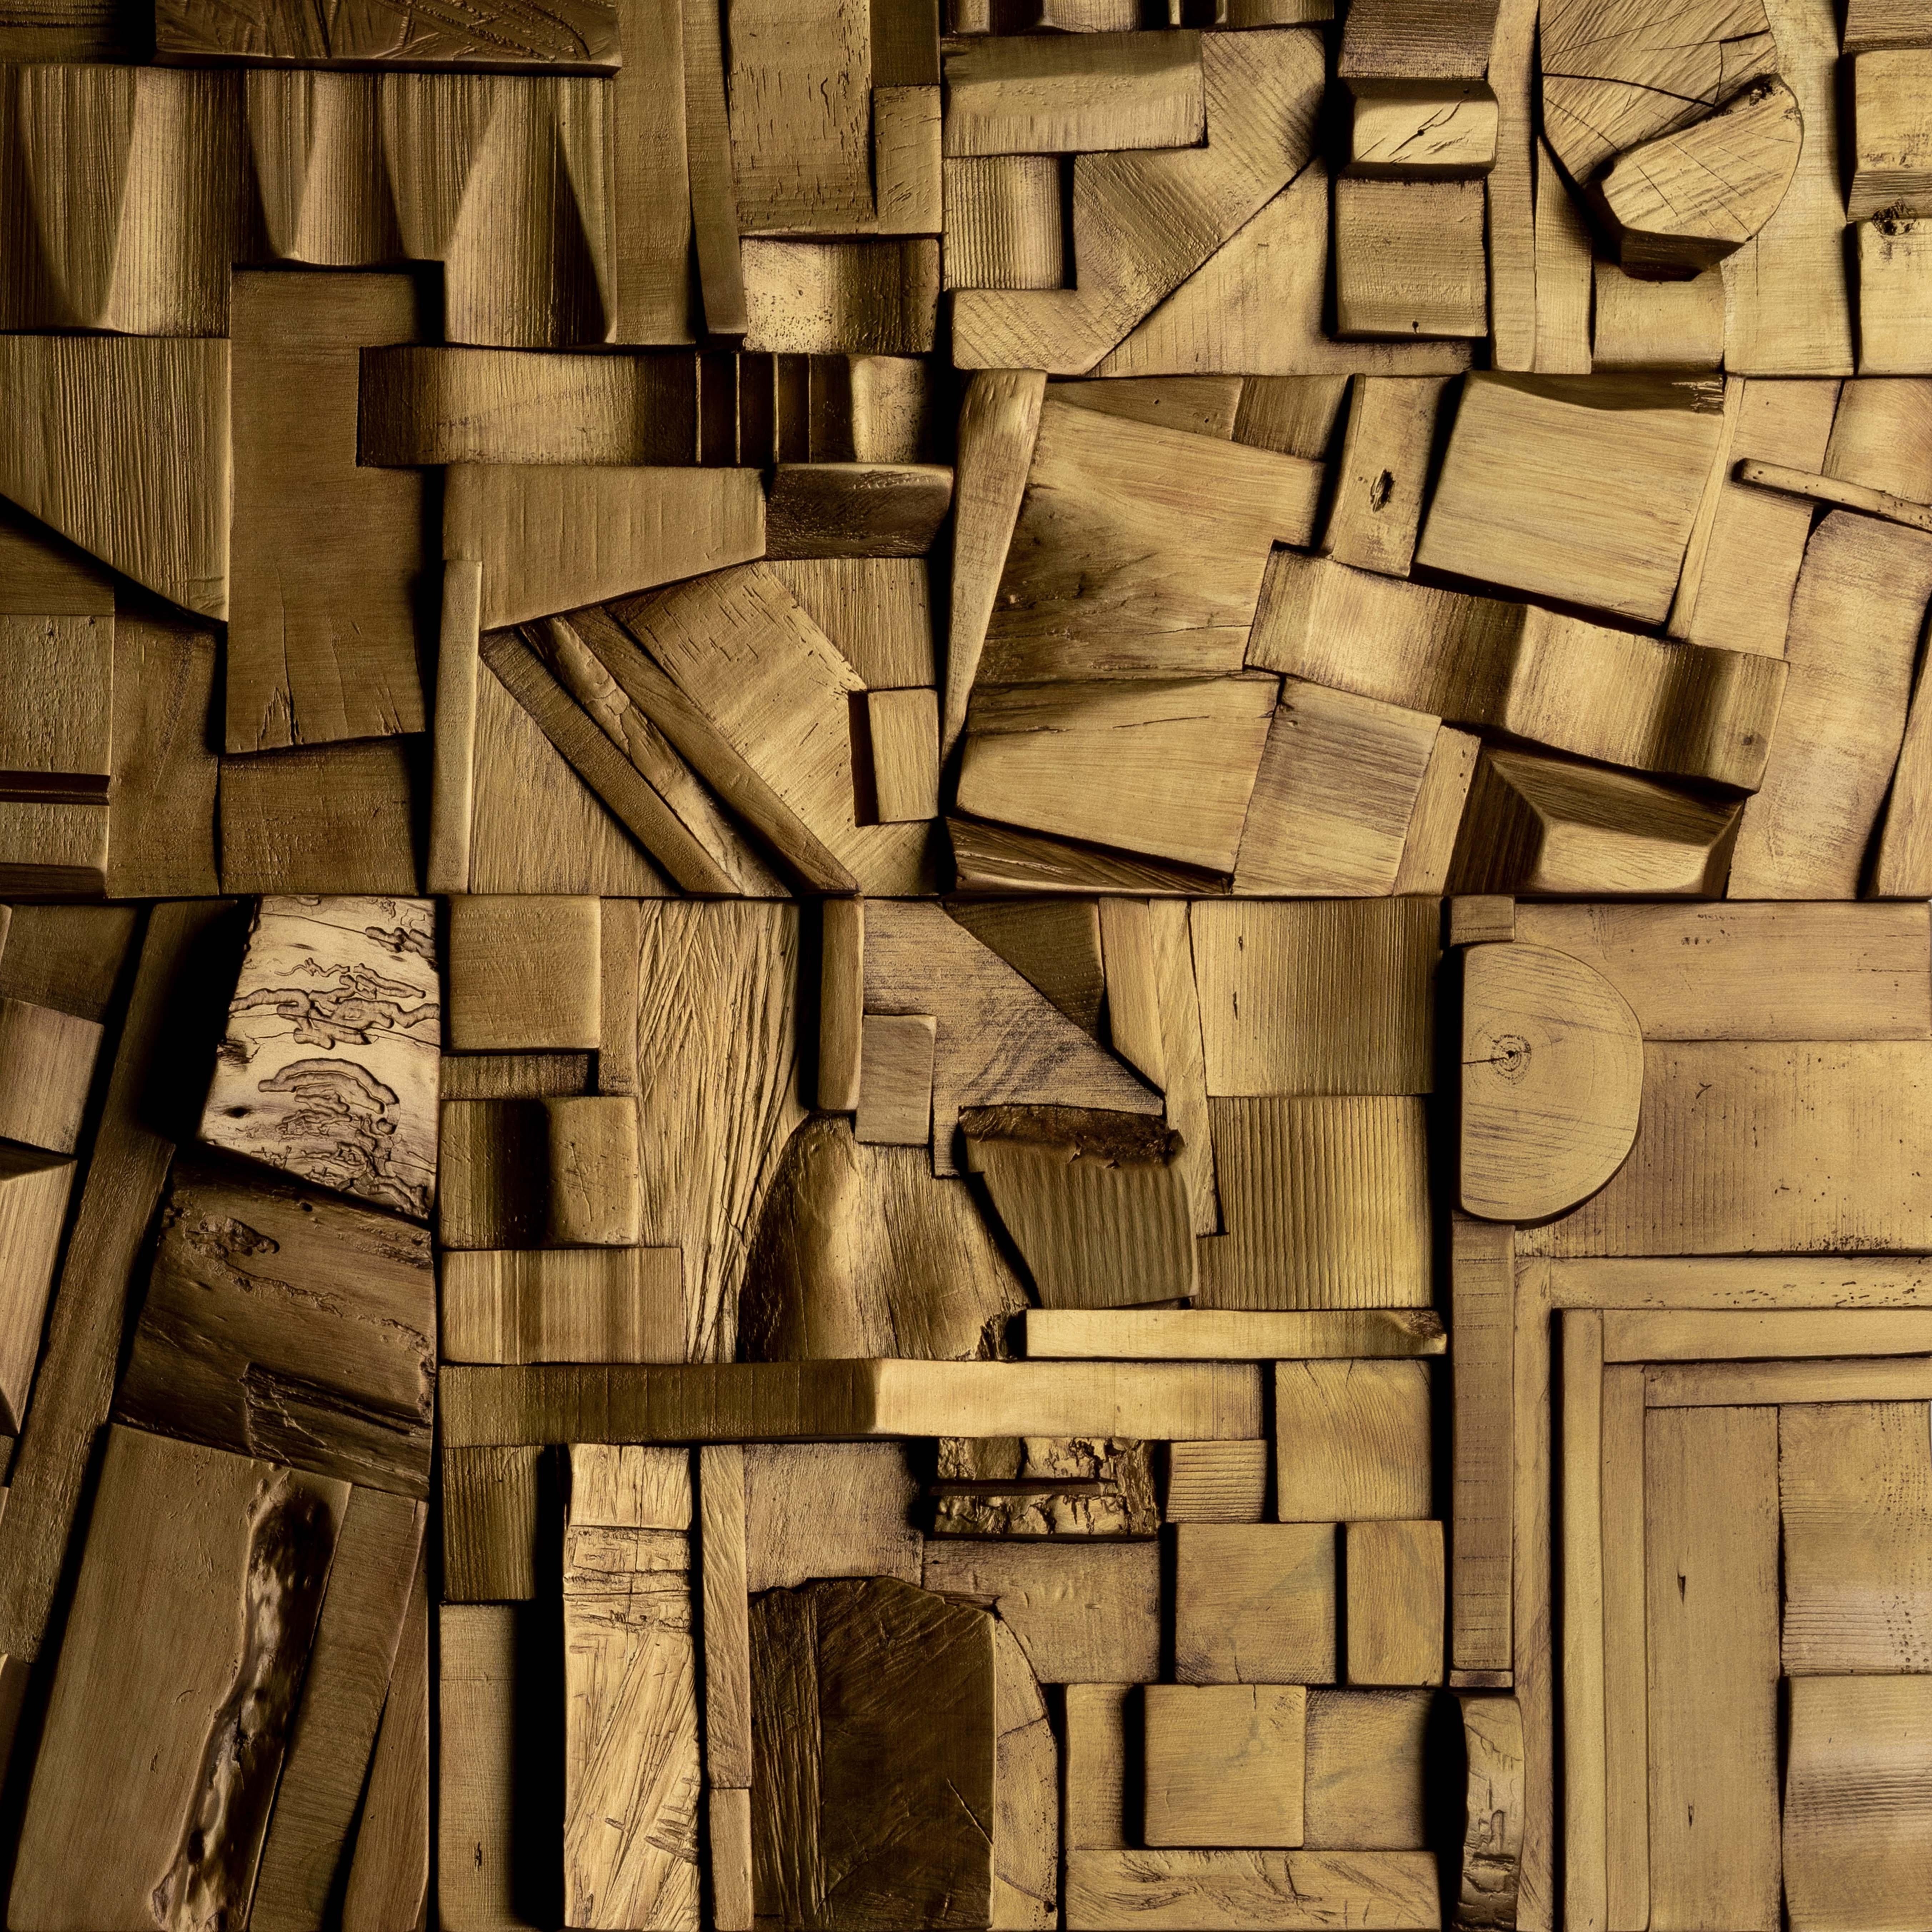 Gold Brutalist Sculptural Collage Artwork, Mural from Upcycled Wood